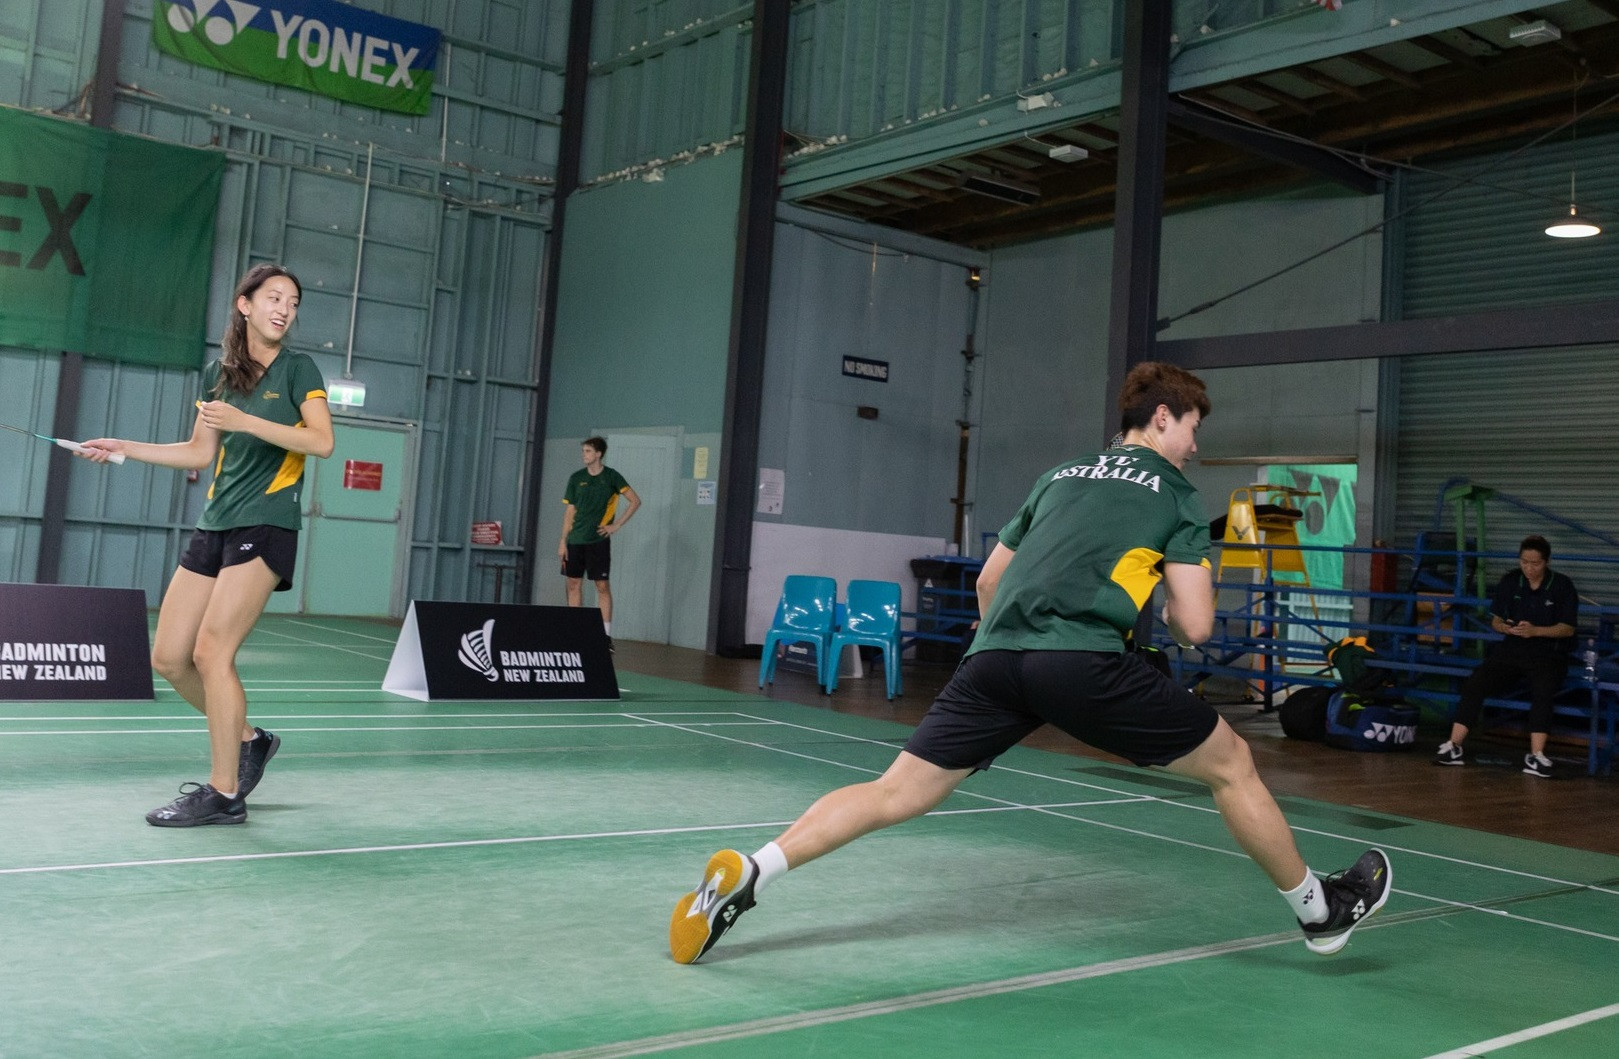 Holders Australia start strongly in mixed team event at Oceania Badminton Championships